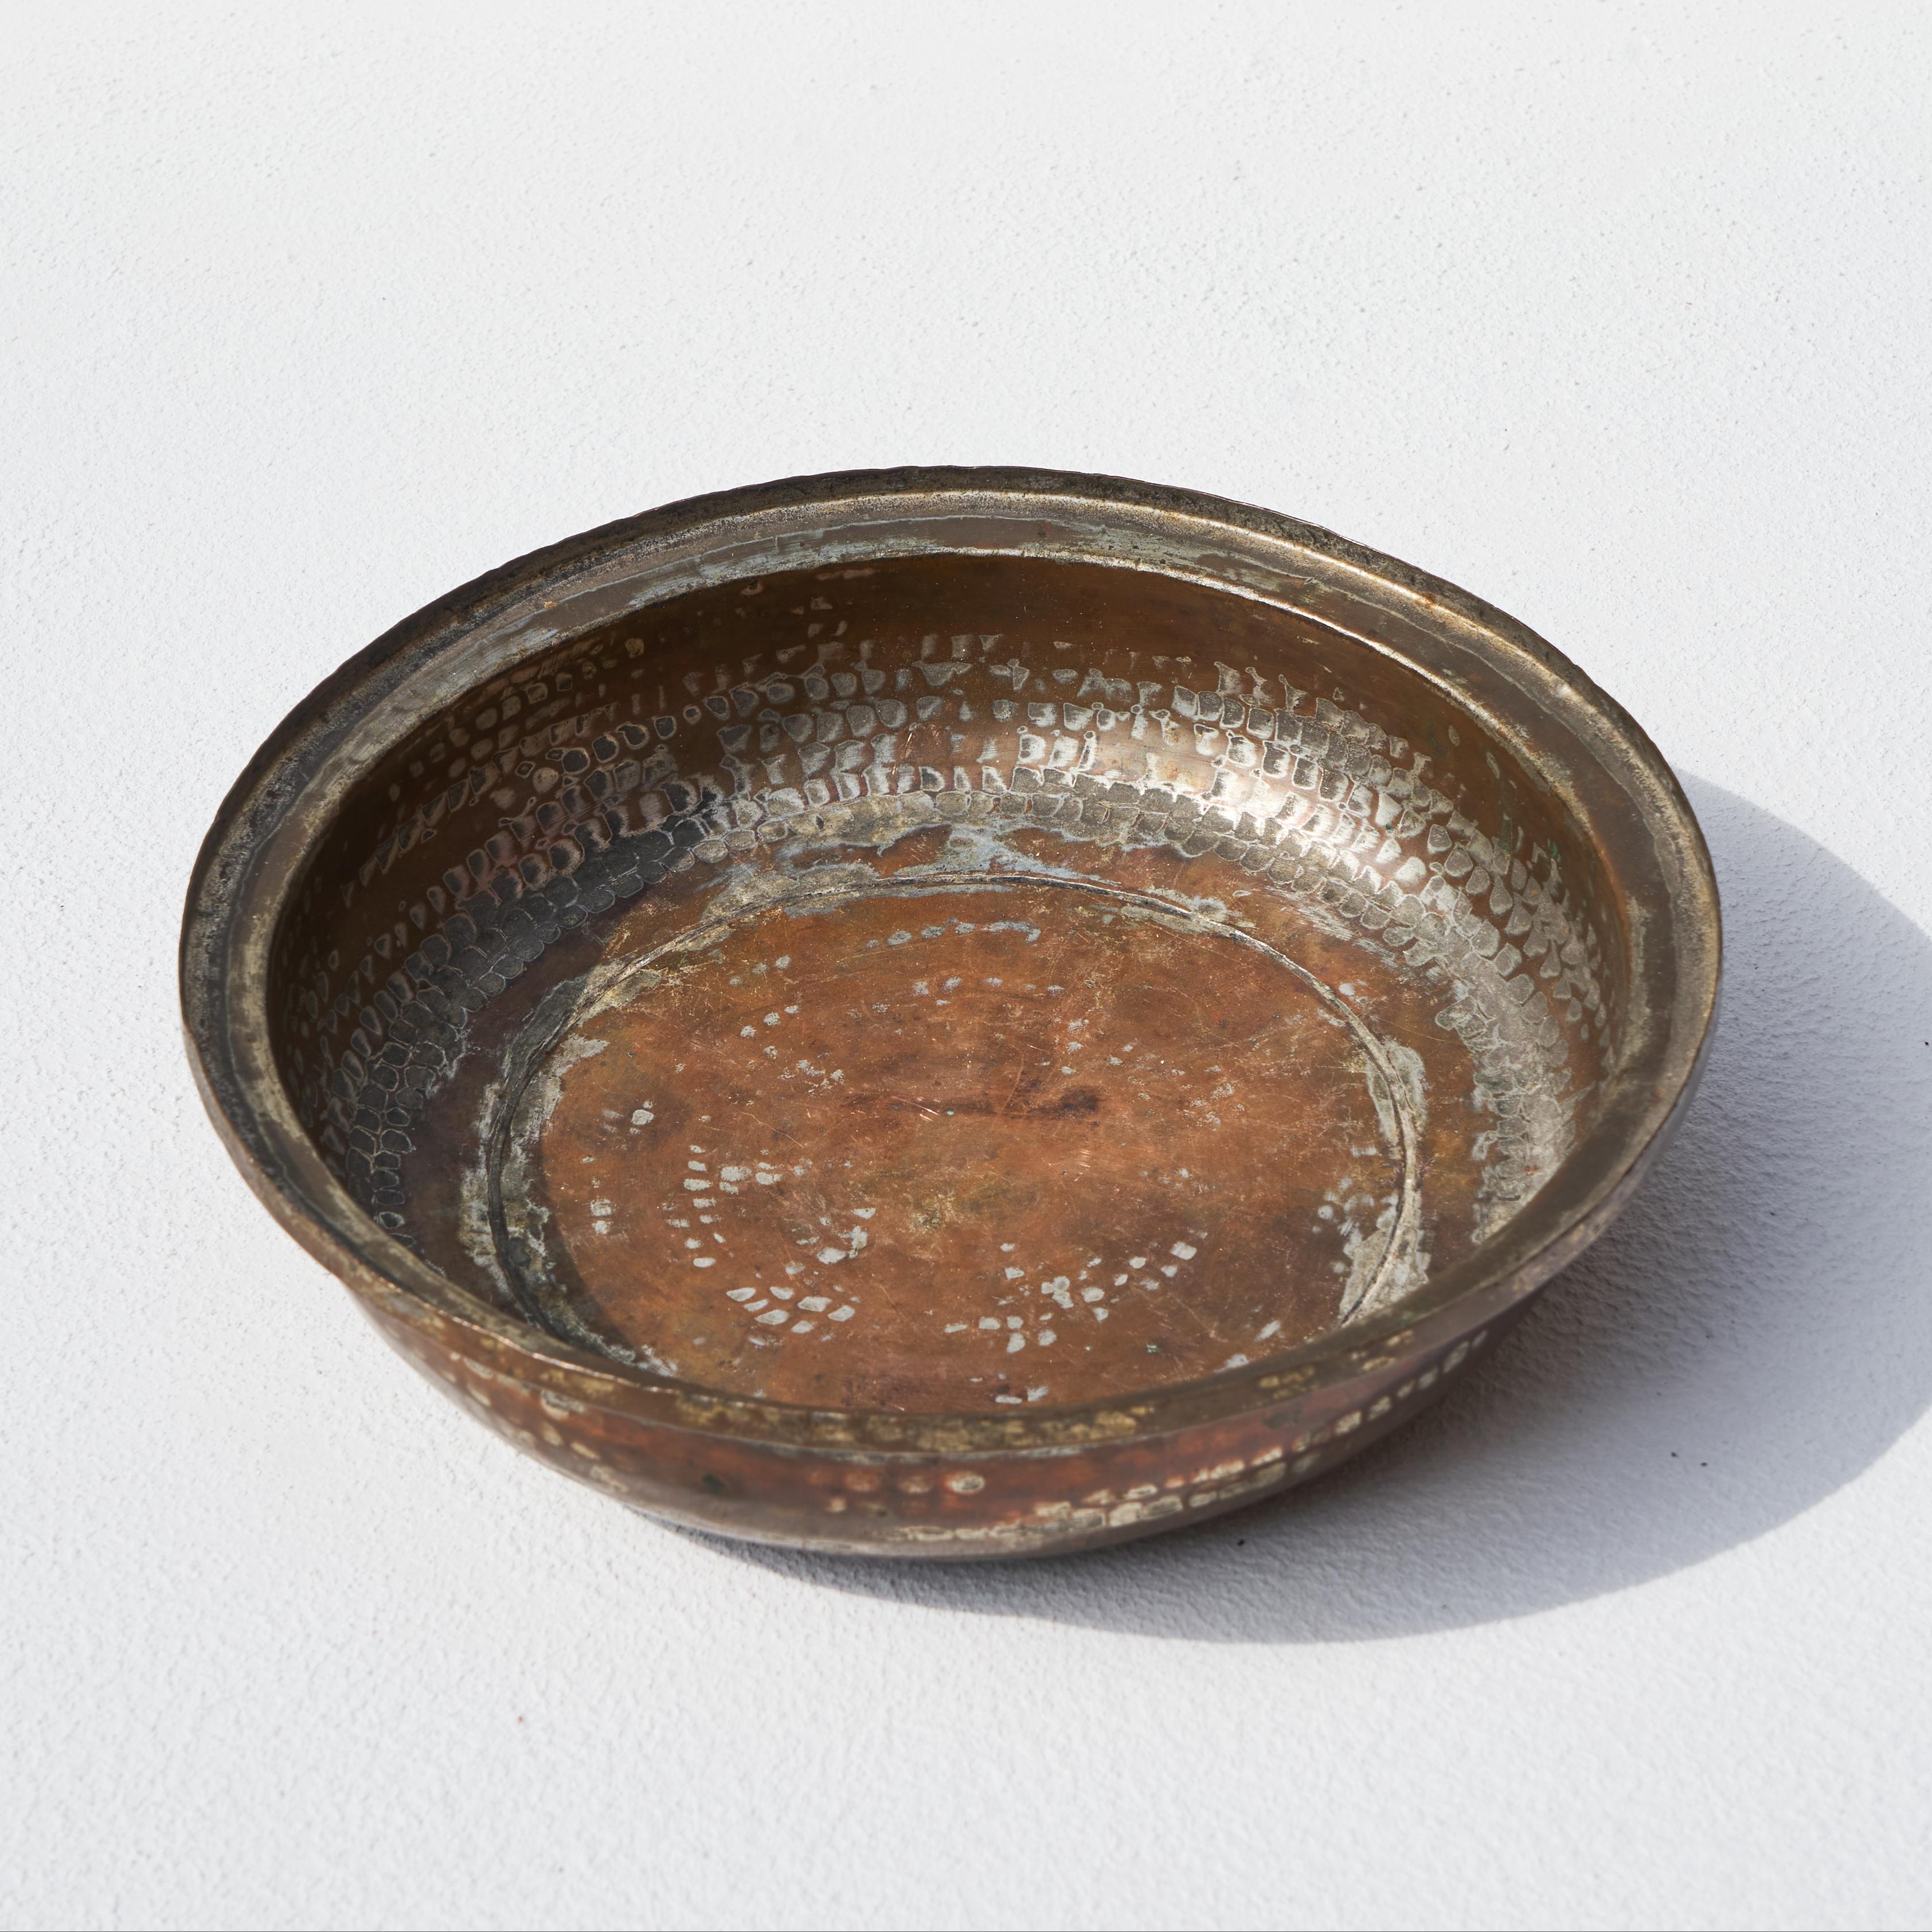 Decorative Bowl, hand hammered and beautifully patinated. Early 20th century.

This is a large decorative bowl, fruit bowl or vide-poche. Hand hammered and shaped. Very decorative and due to the shifting colors, hand hammered surfaces and the